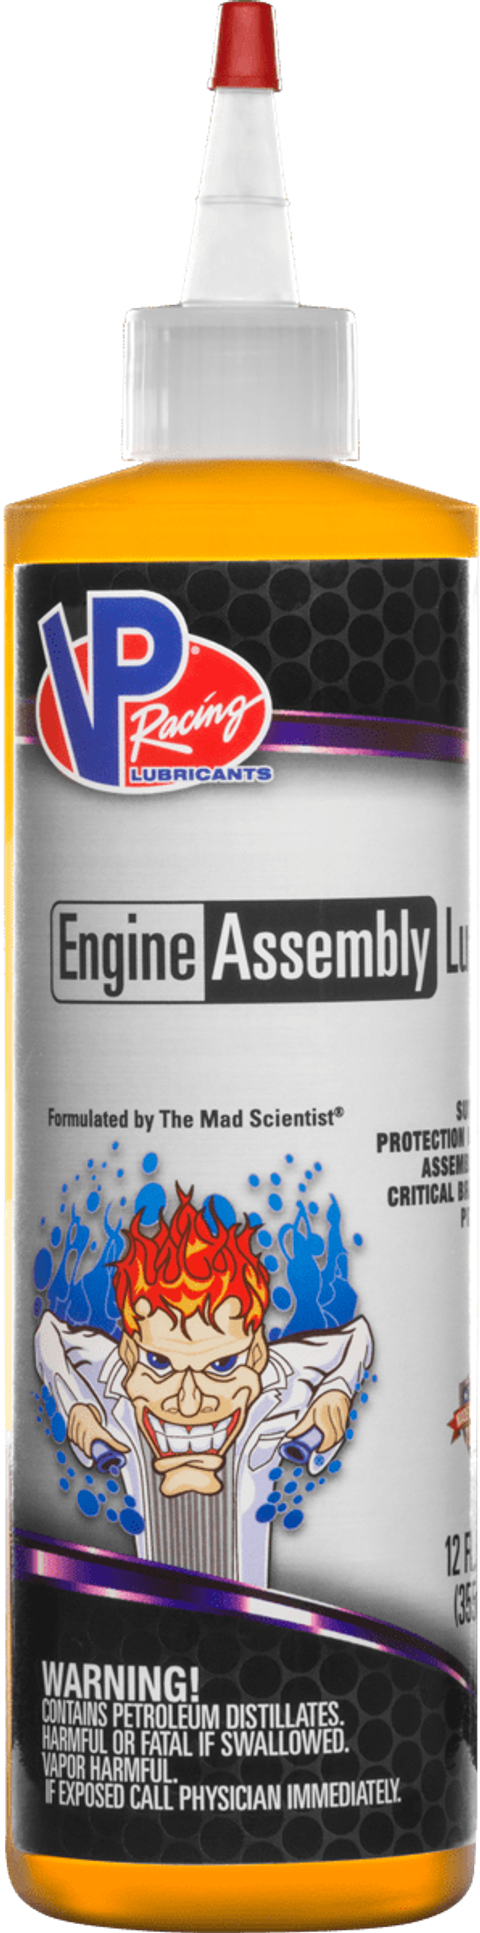 Assembly-Lube